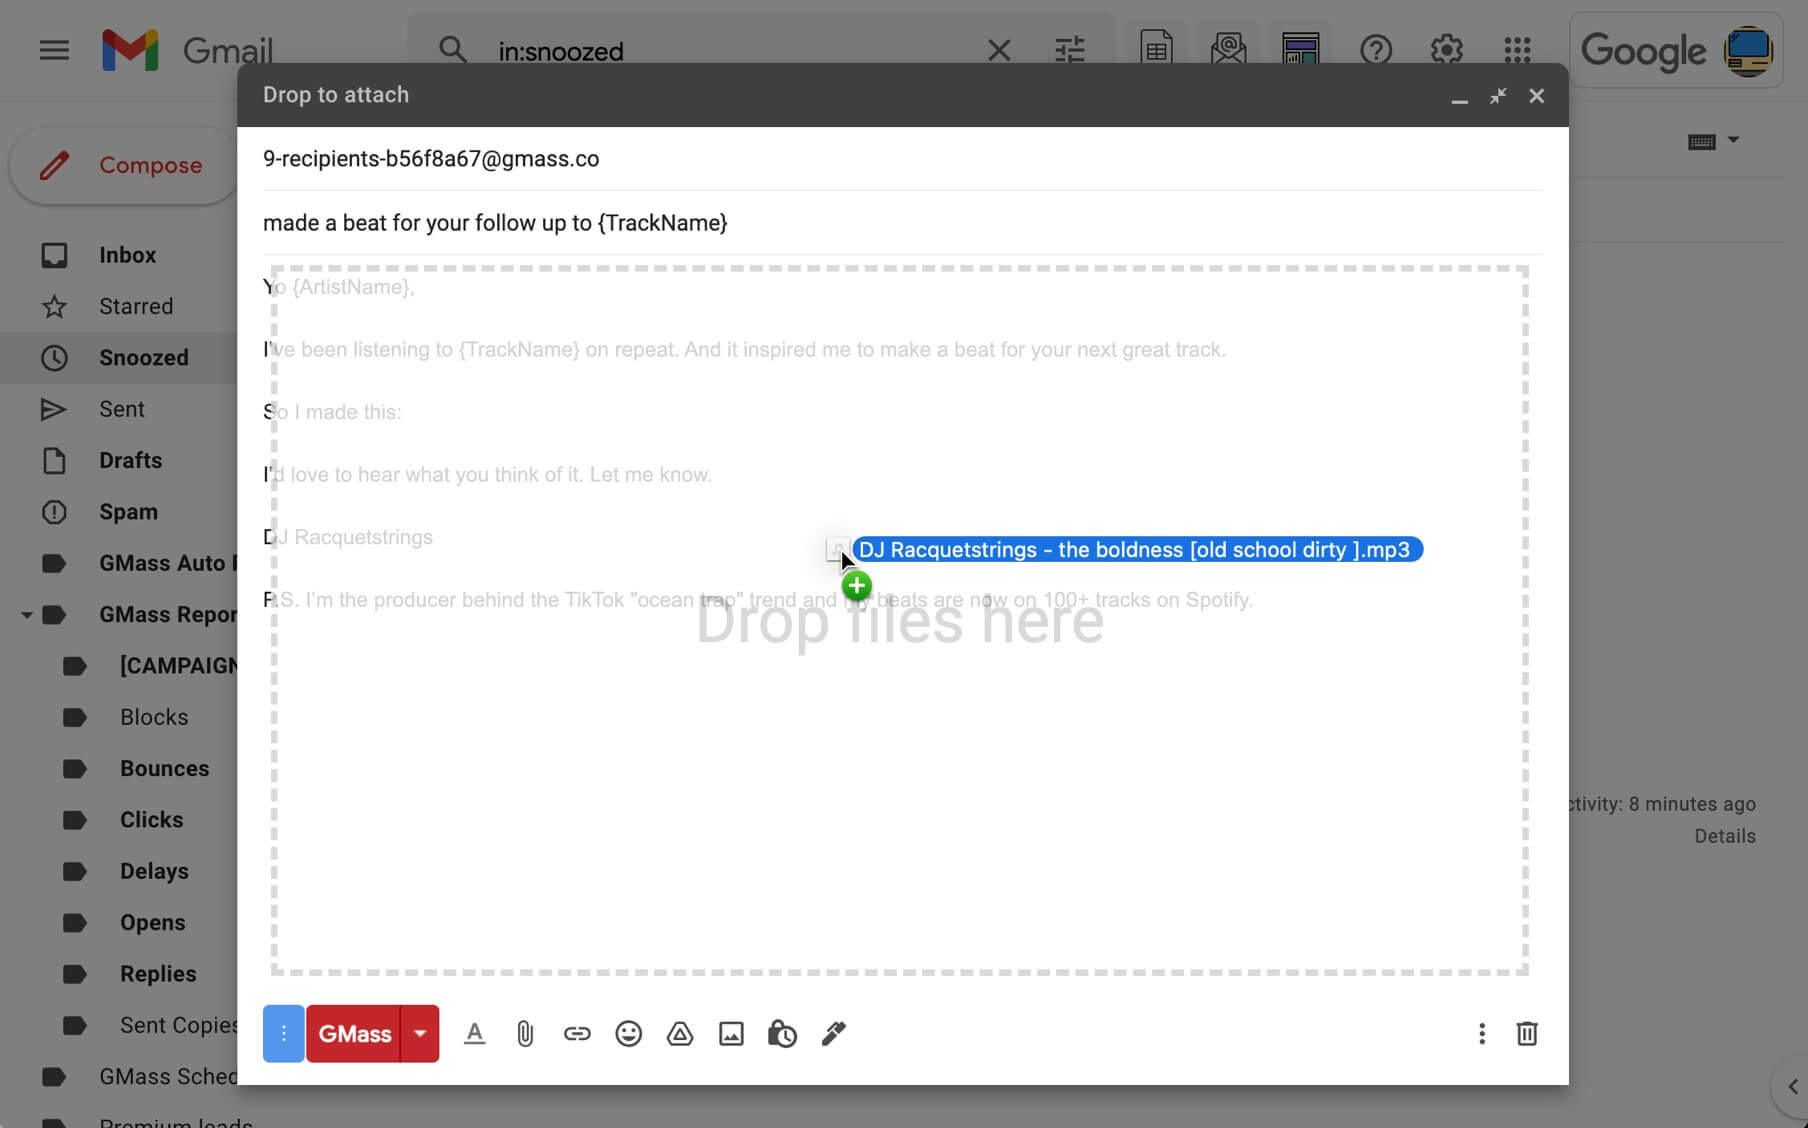 Drag your mp3 to the Gmail compose window